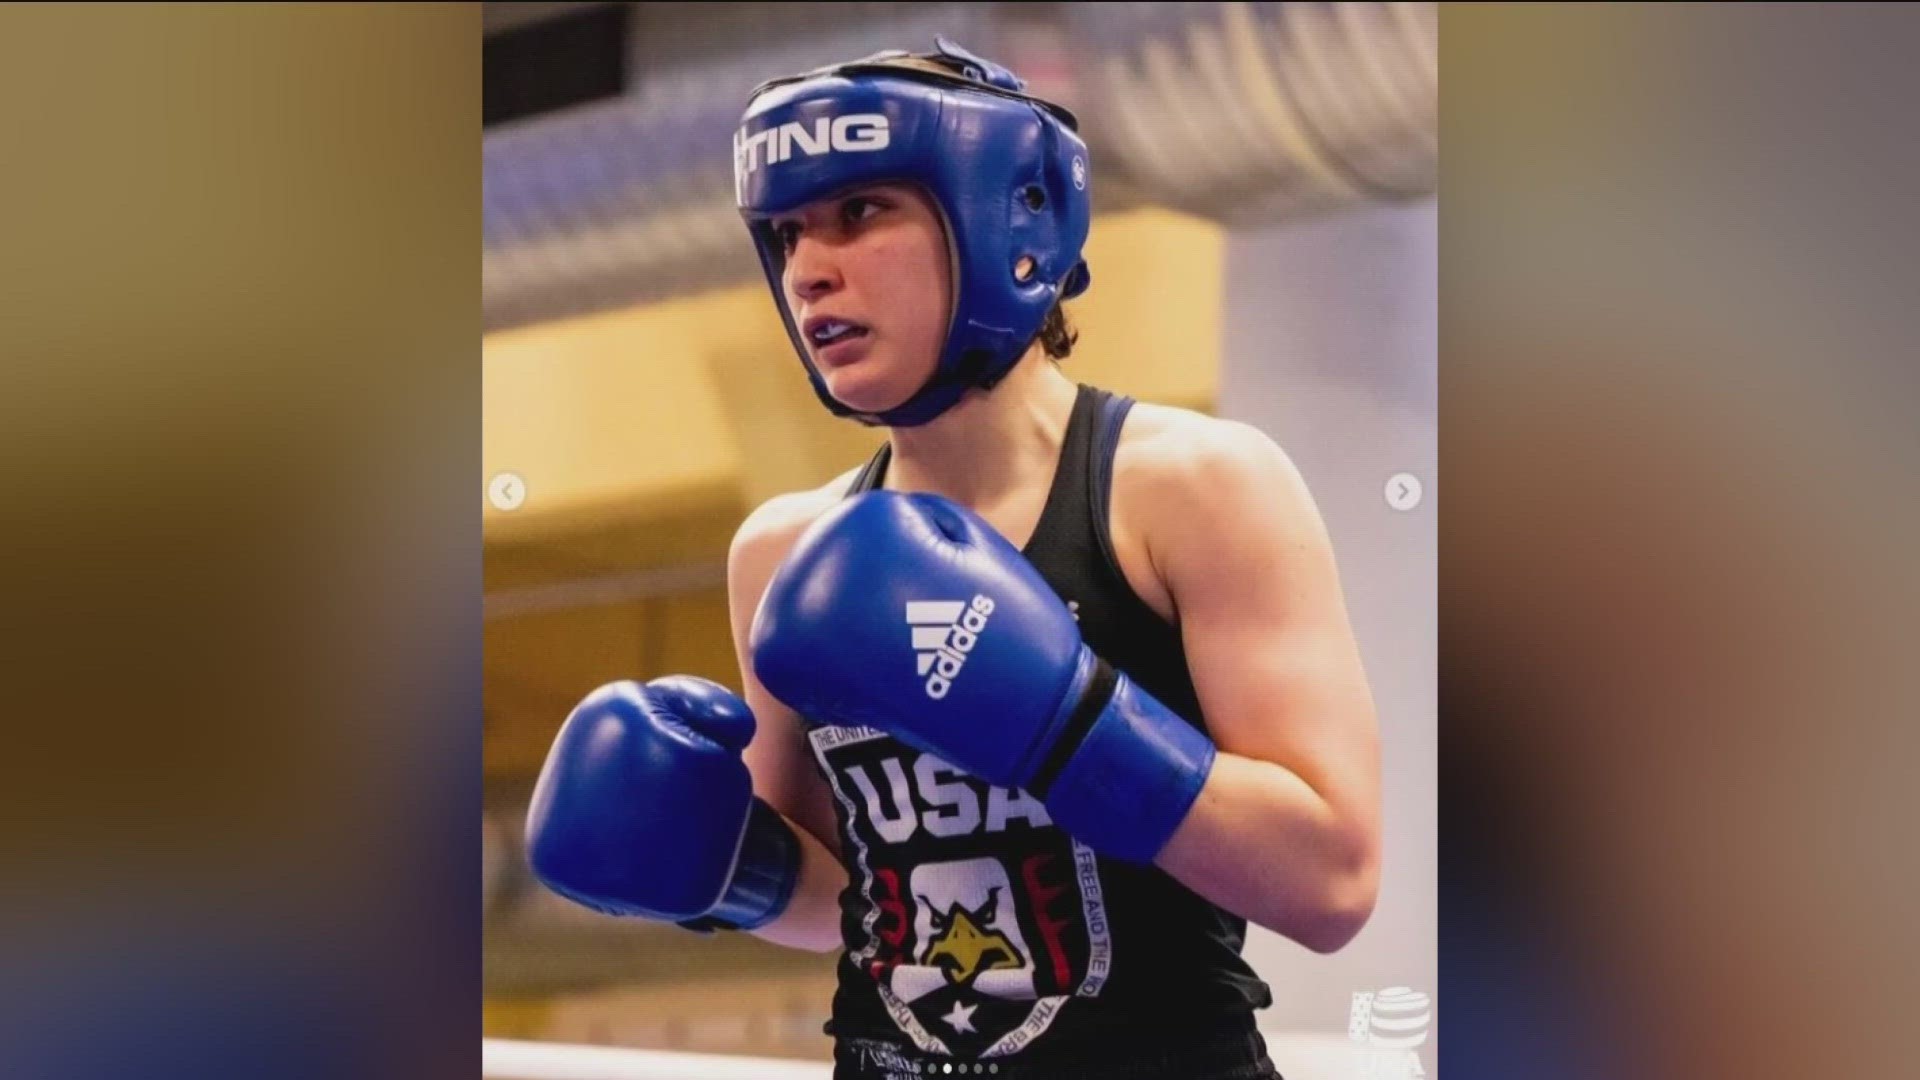 Alyssa Mendoza is the only Idahoan boxer on Team USA. The 20-year-old won gold at the 2022 USA Boxing Elite National Championships.